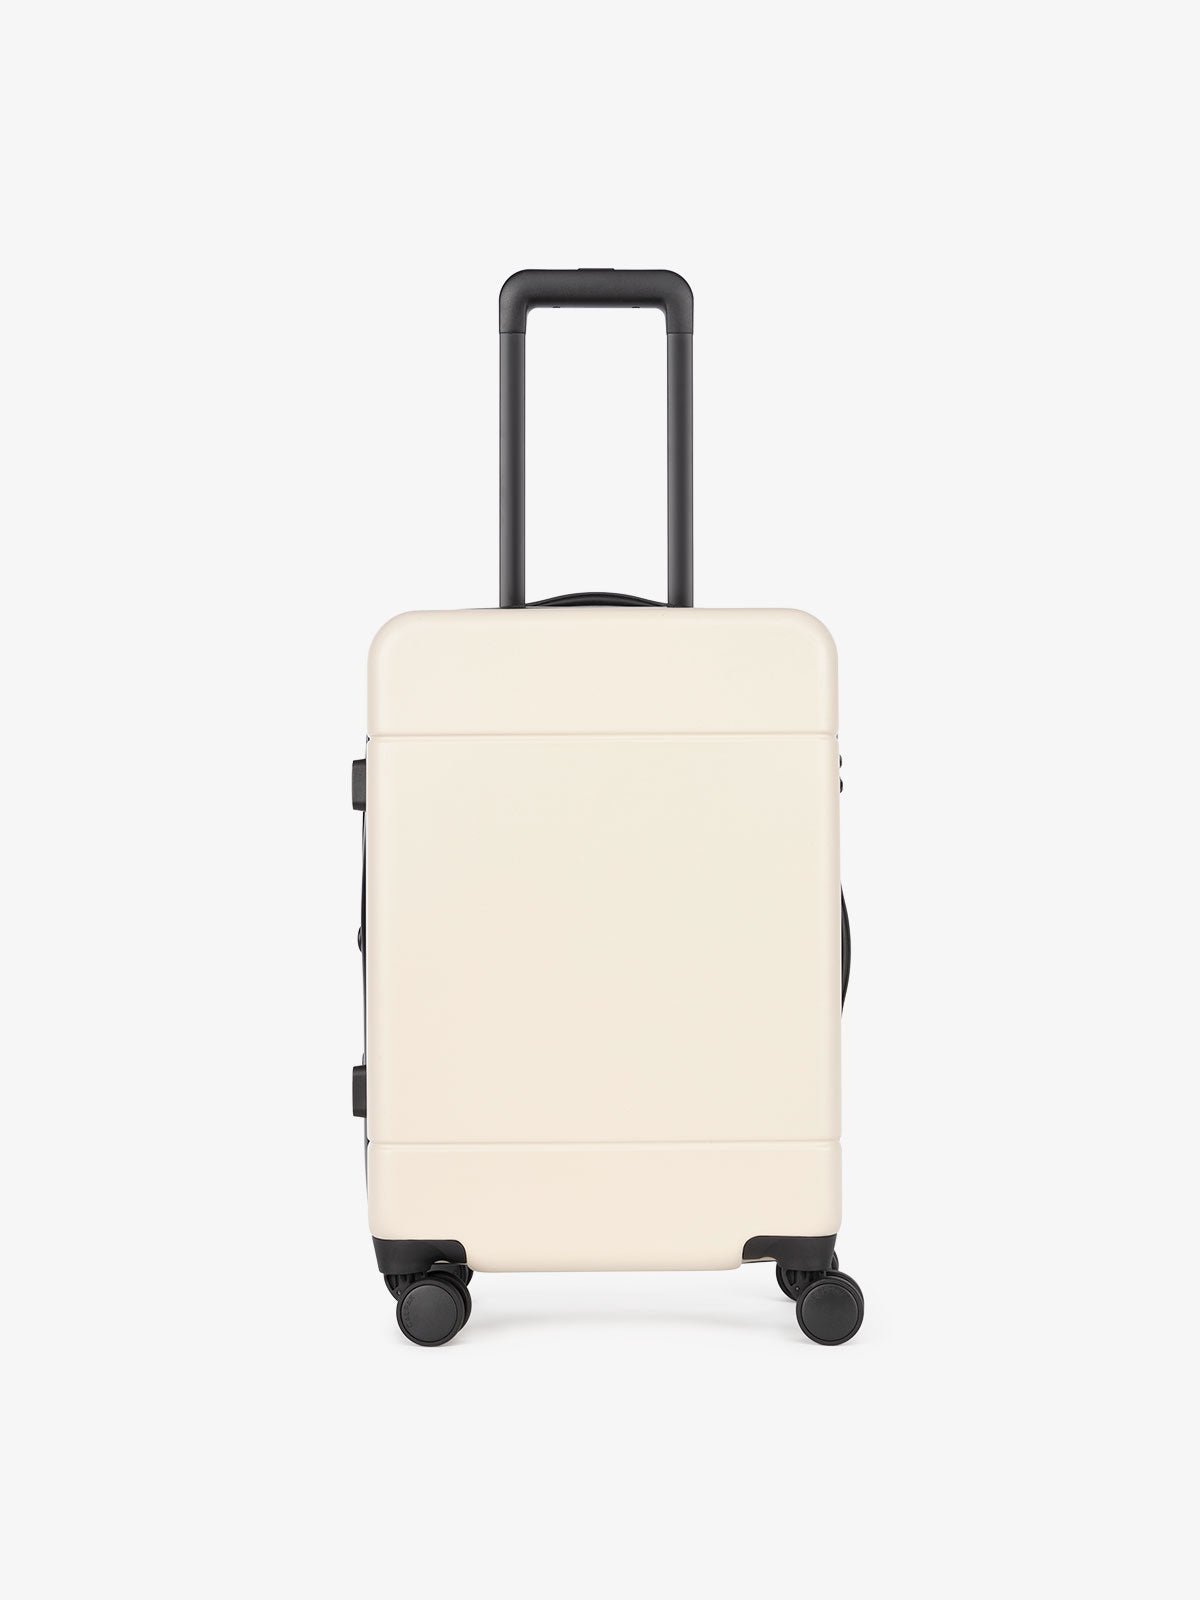 CALPAK Hue hard shell rolling carry-on luggage in linen cream color